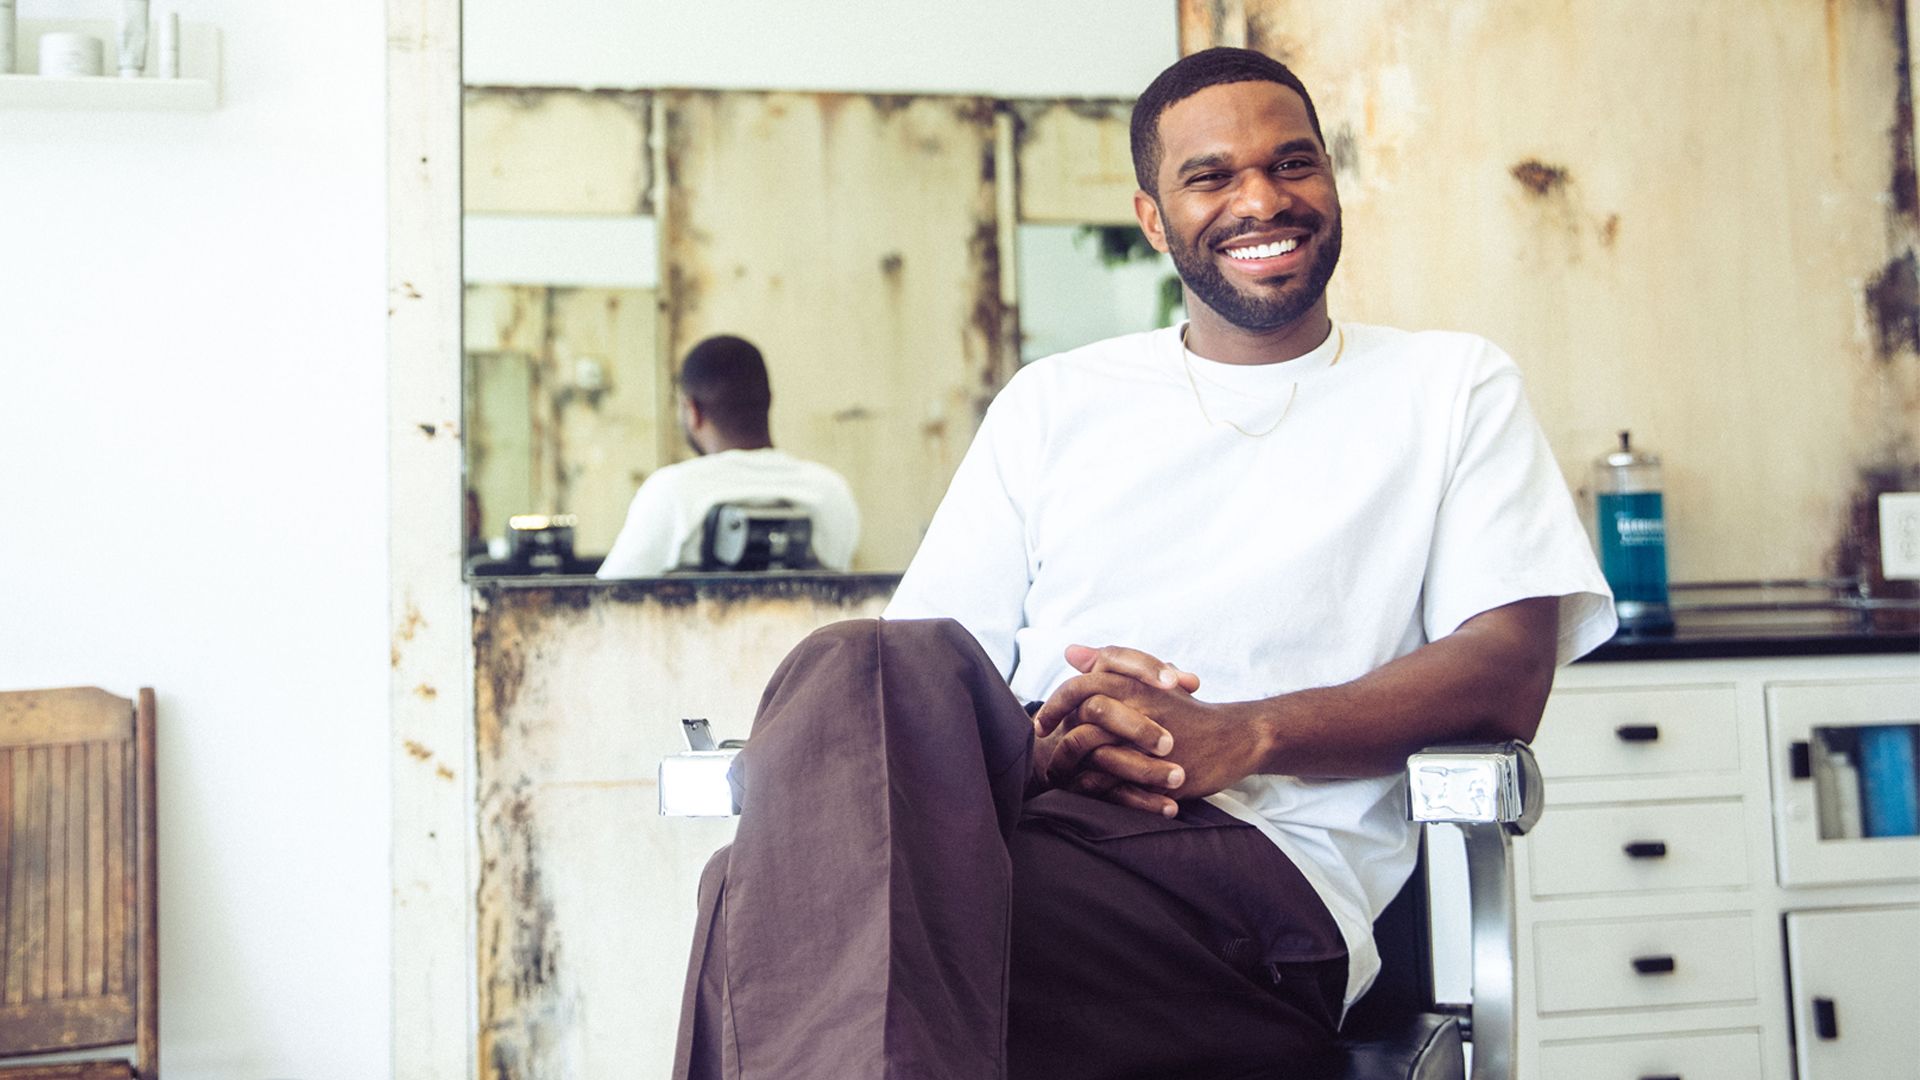 A smiling young man named Bradford joined us at an LA barbershop. Here he's seen sat down in the barber chair